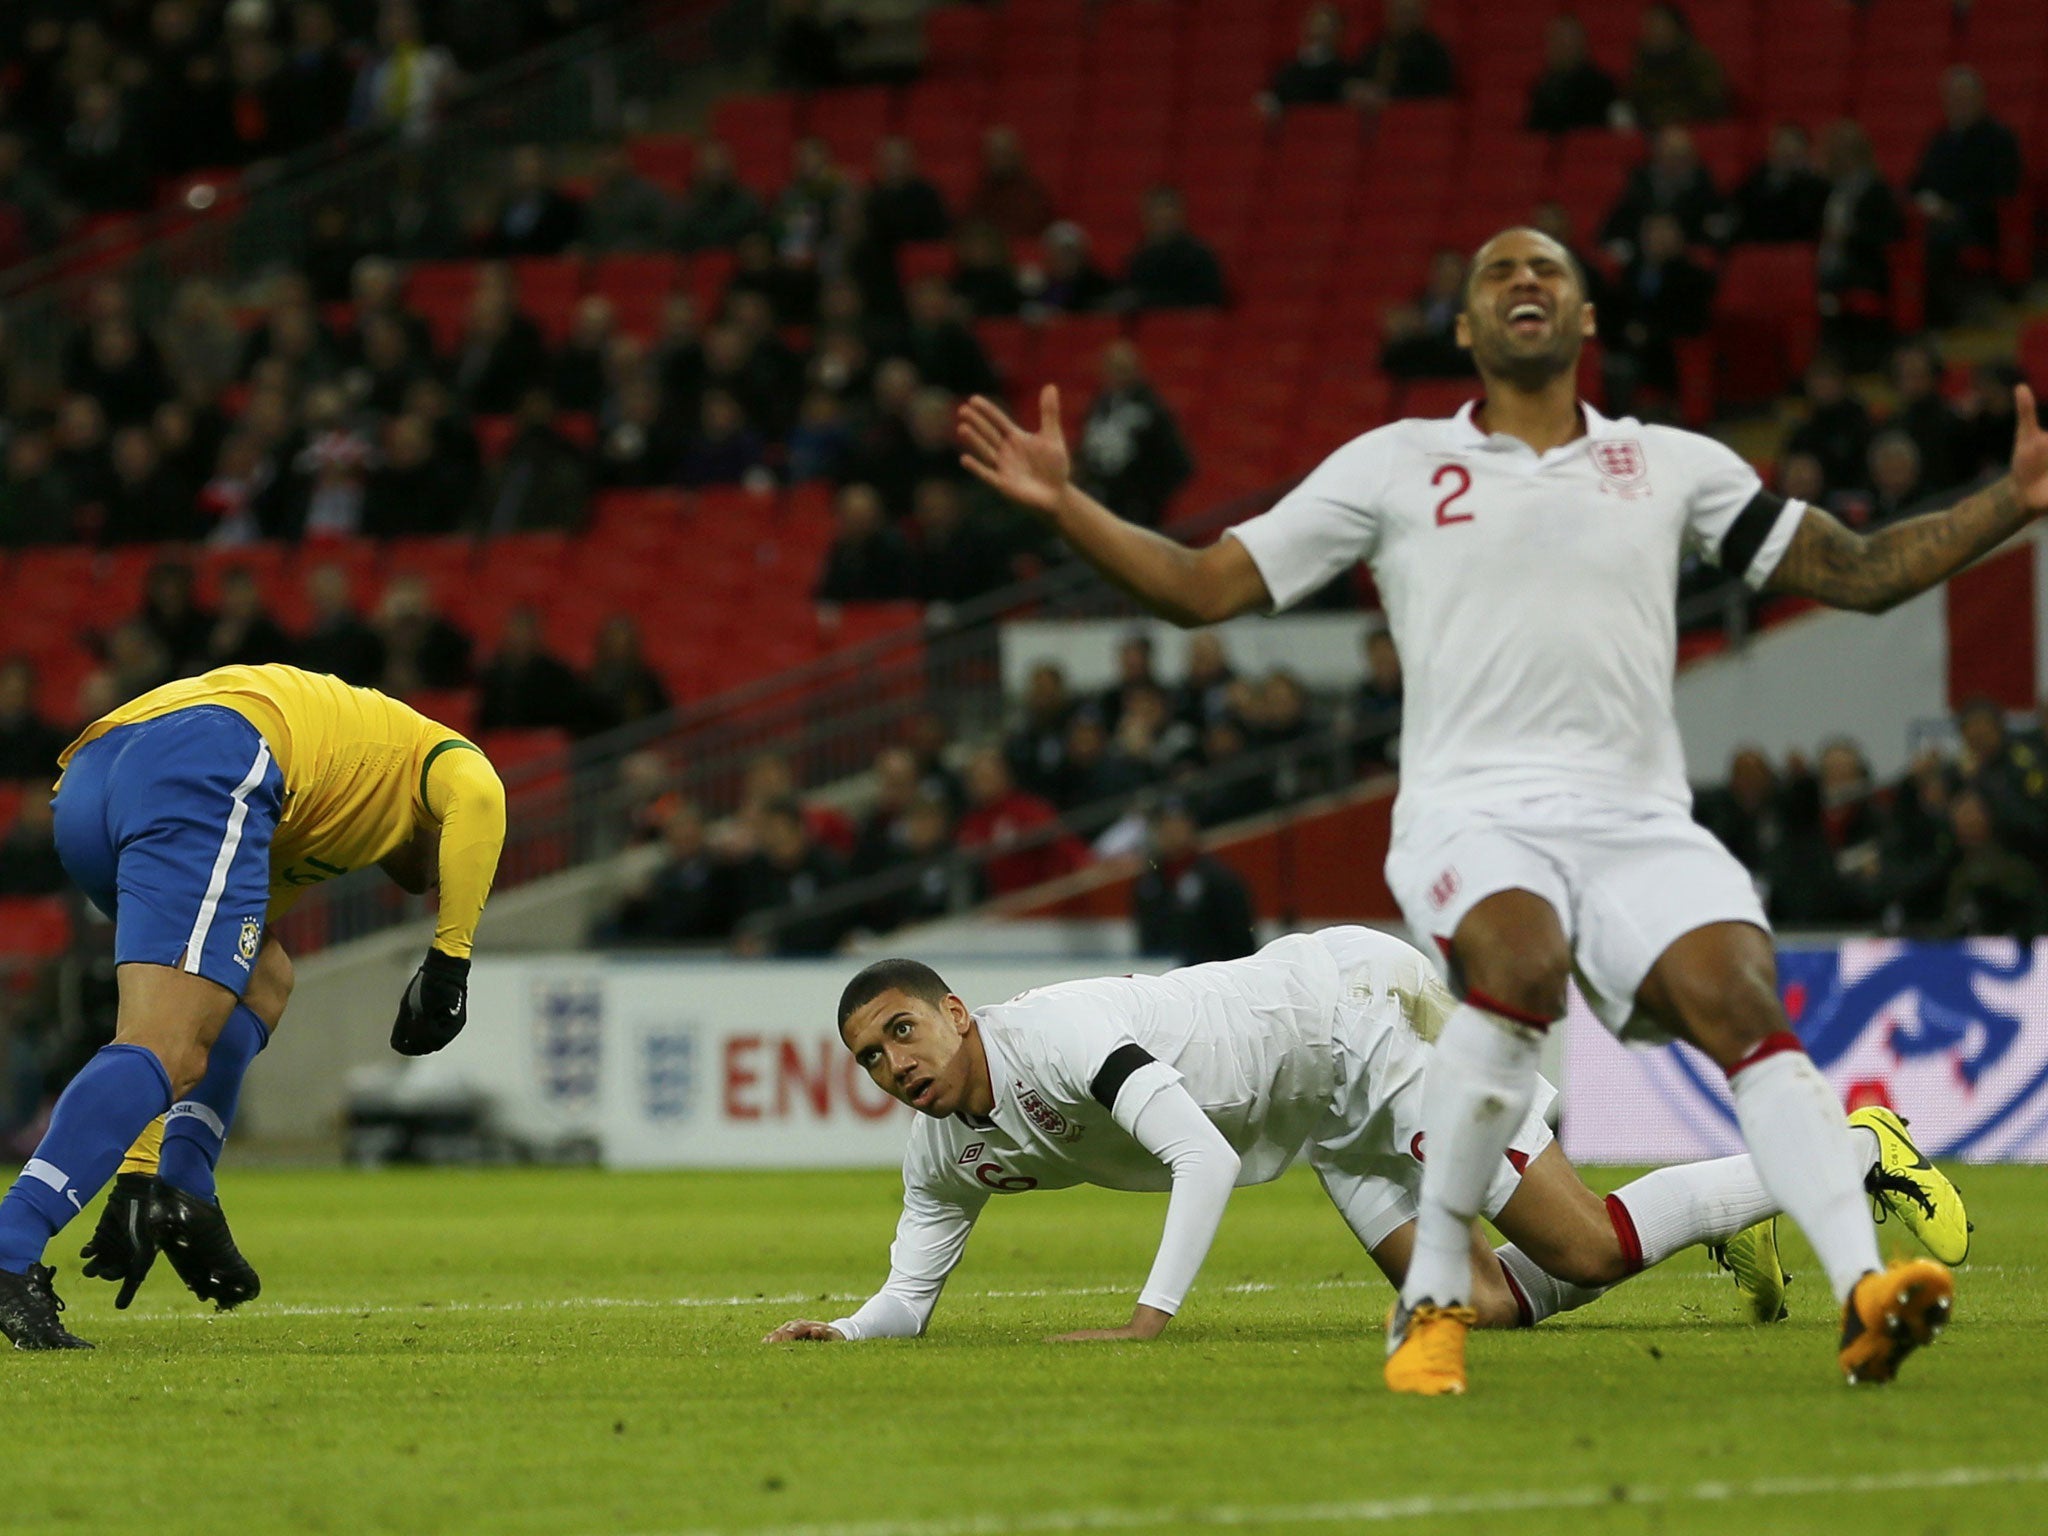 Glen Johnson and Chris Smalling (centre) react after Fred (left) scores Brazil’s goal at Wembley